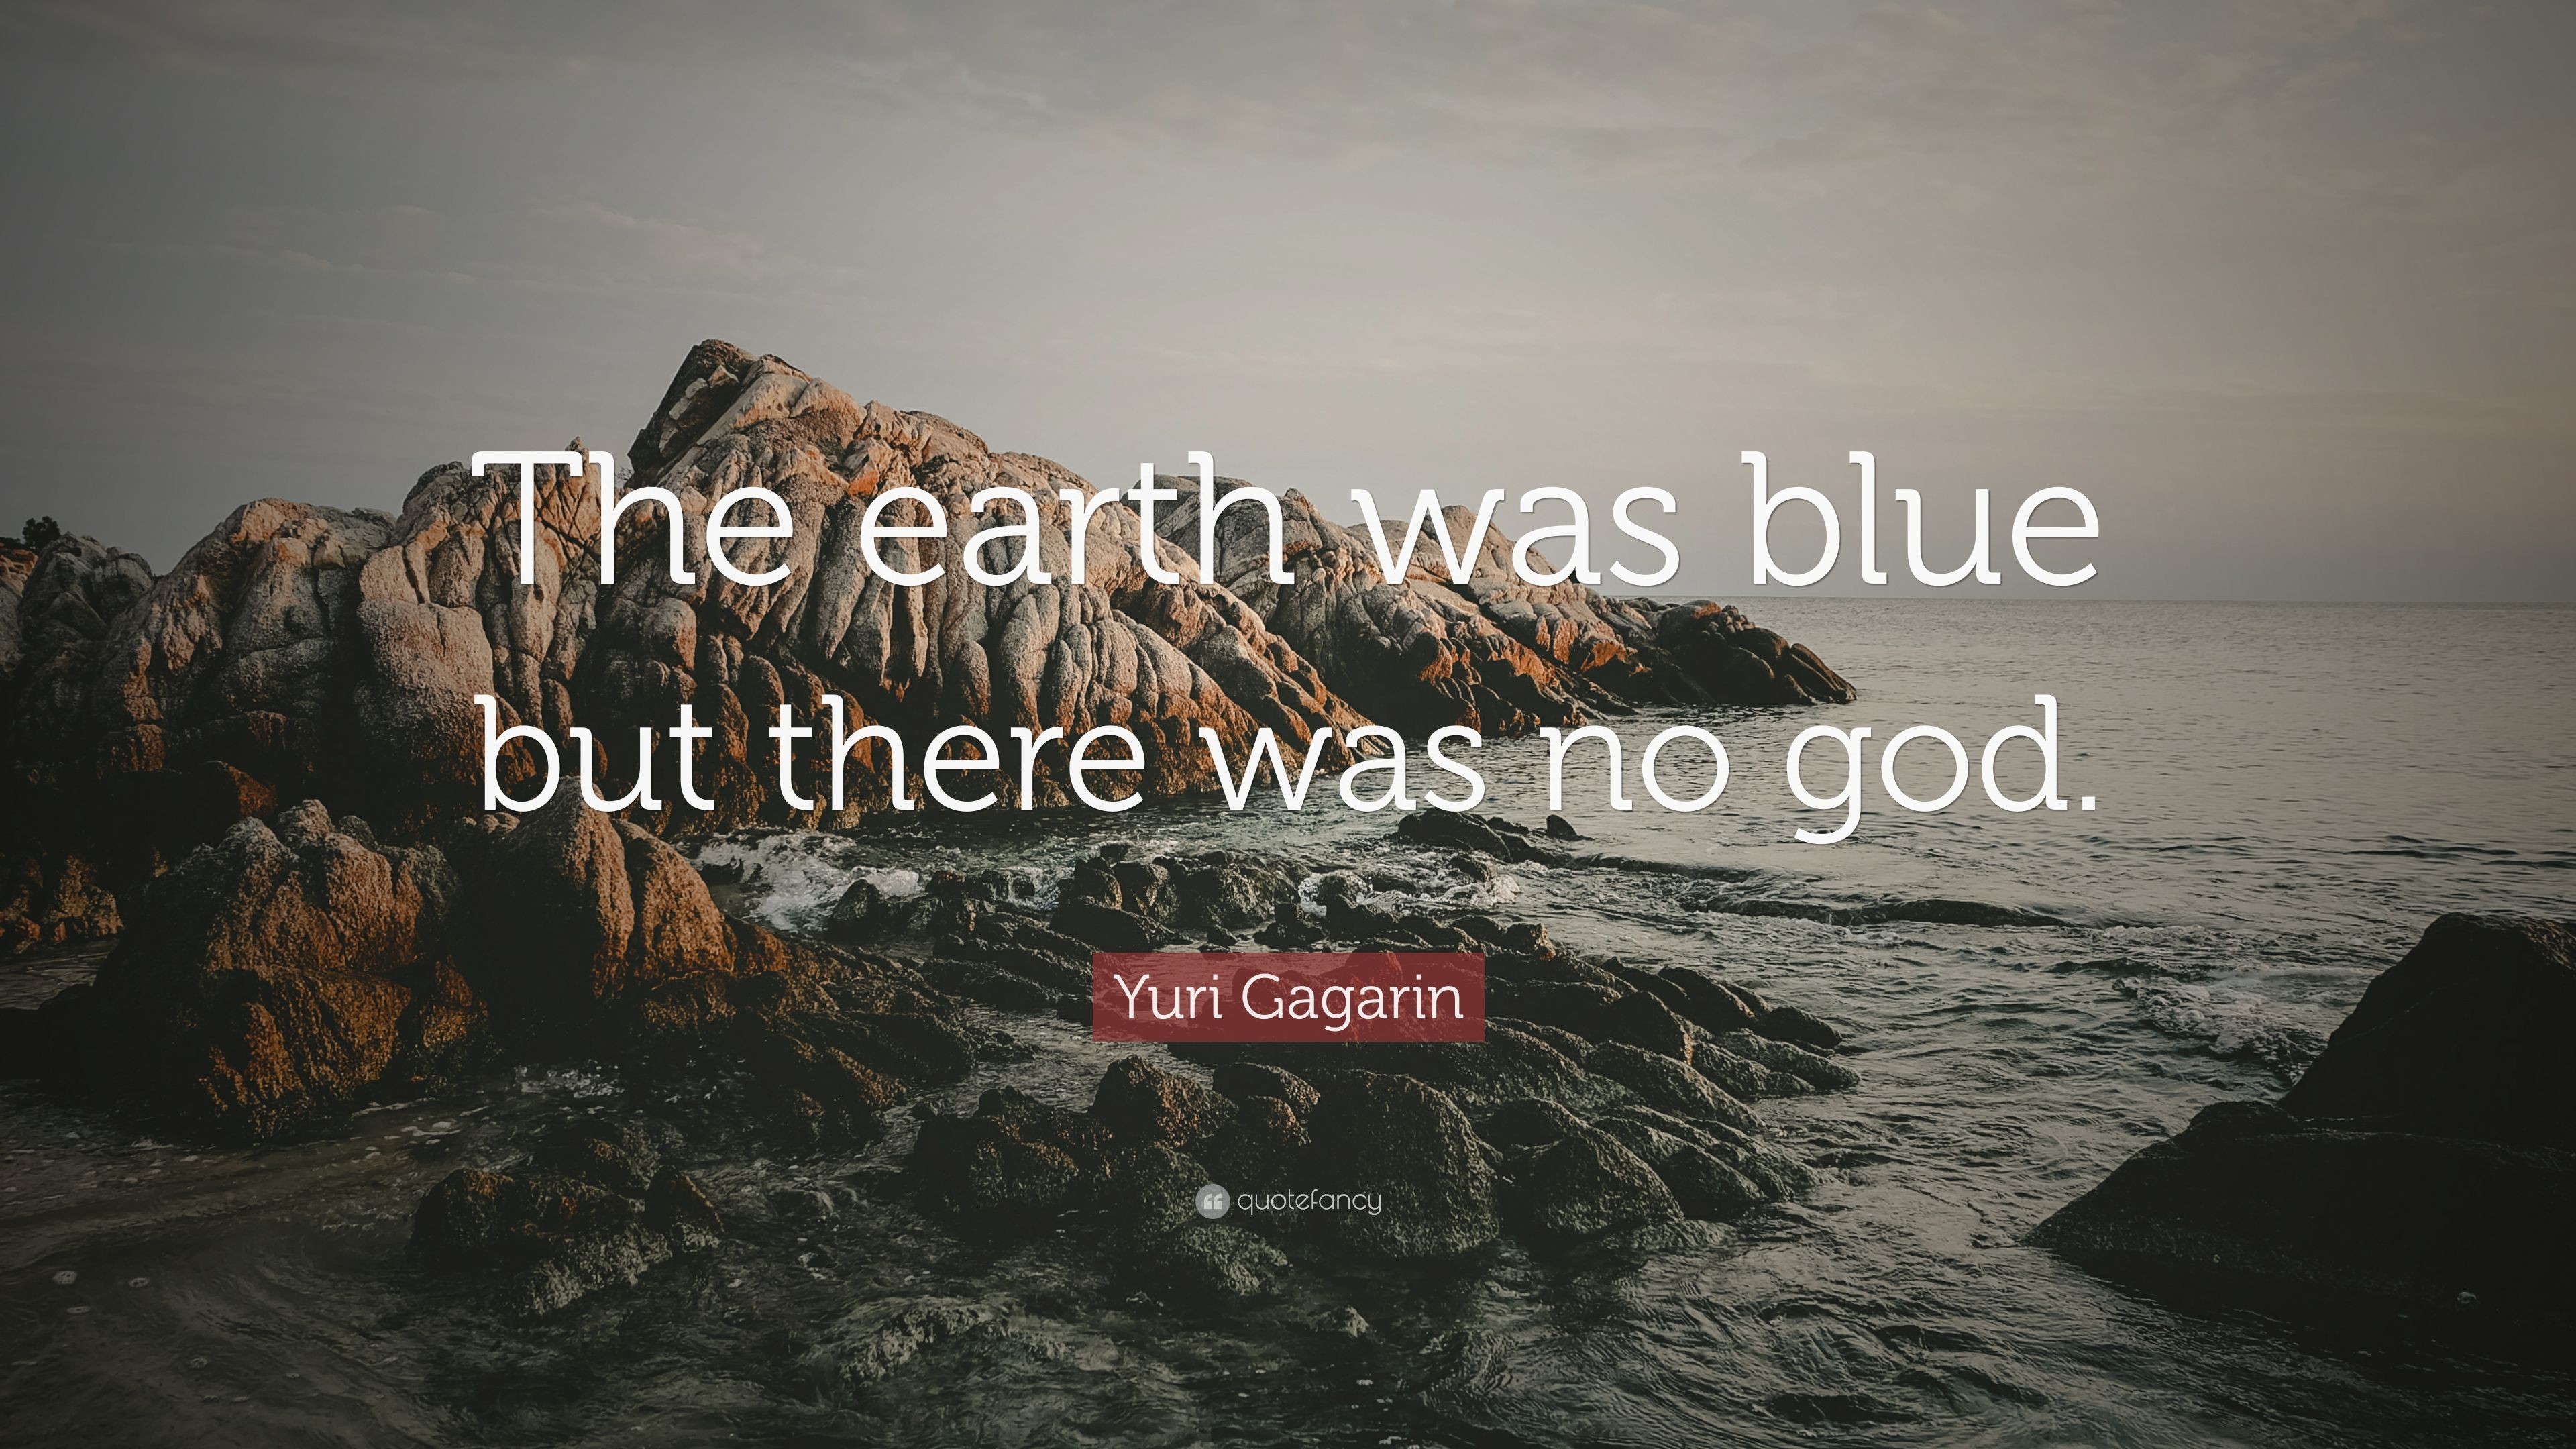 3840x2160 Yuri Gagarin Quote: “The earth was blue but there was no god.”